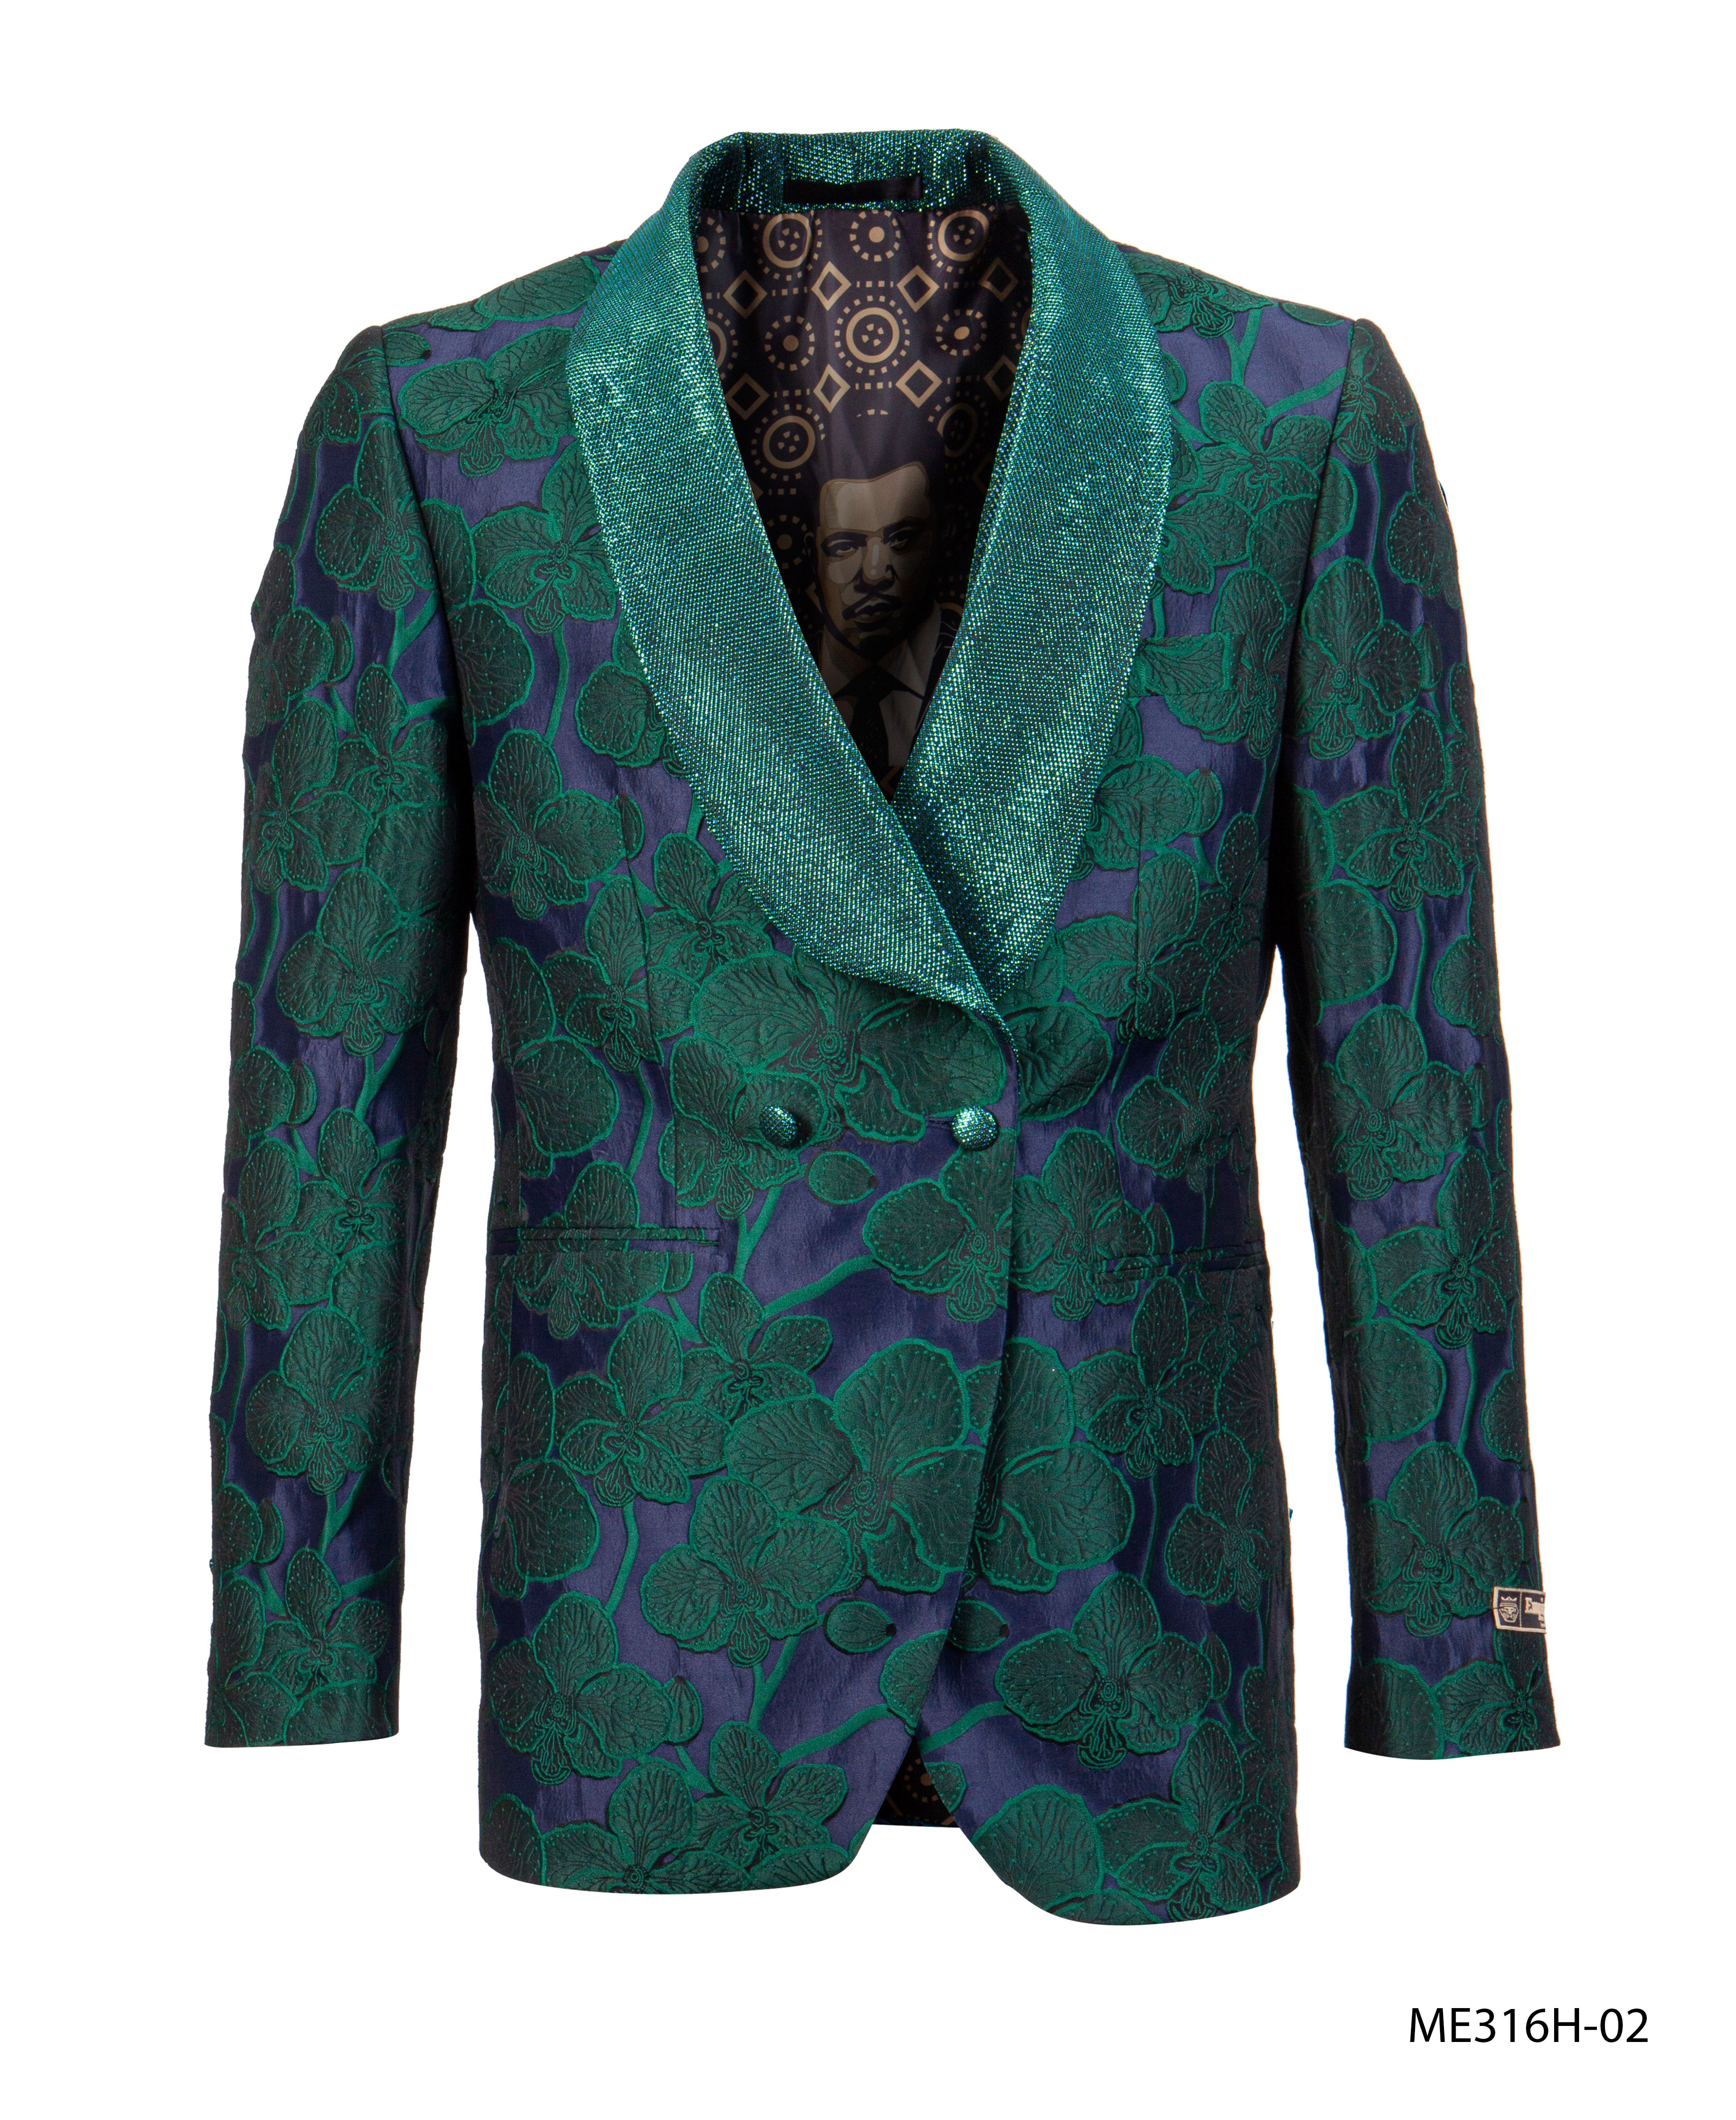 Green Empire Show Blazers Formal Dinner Suit Jackets For Men ME316H-02